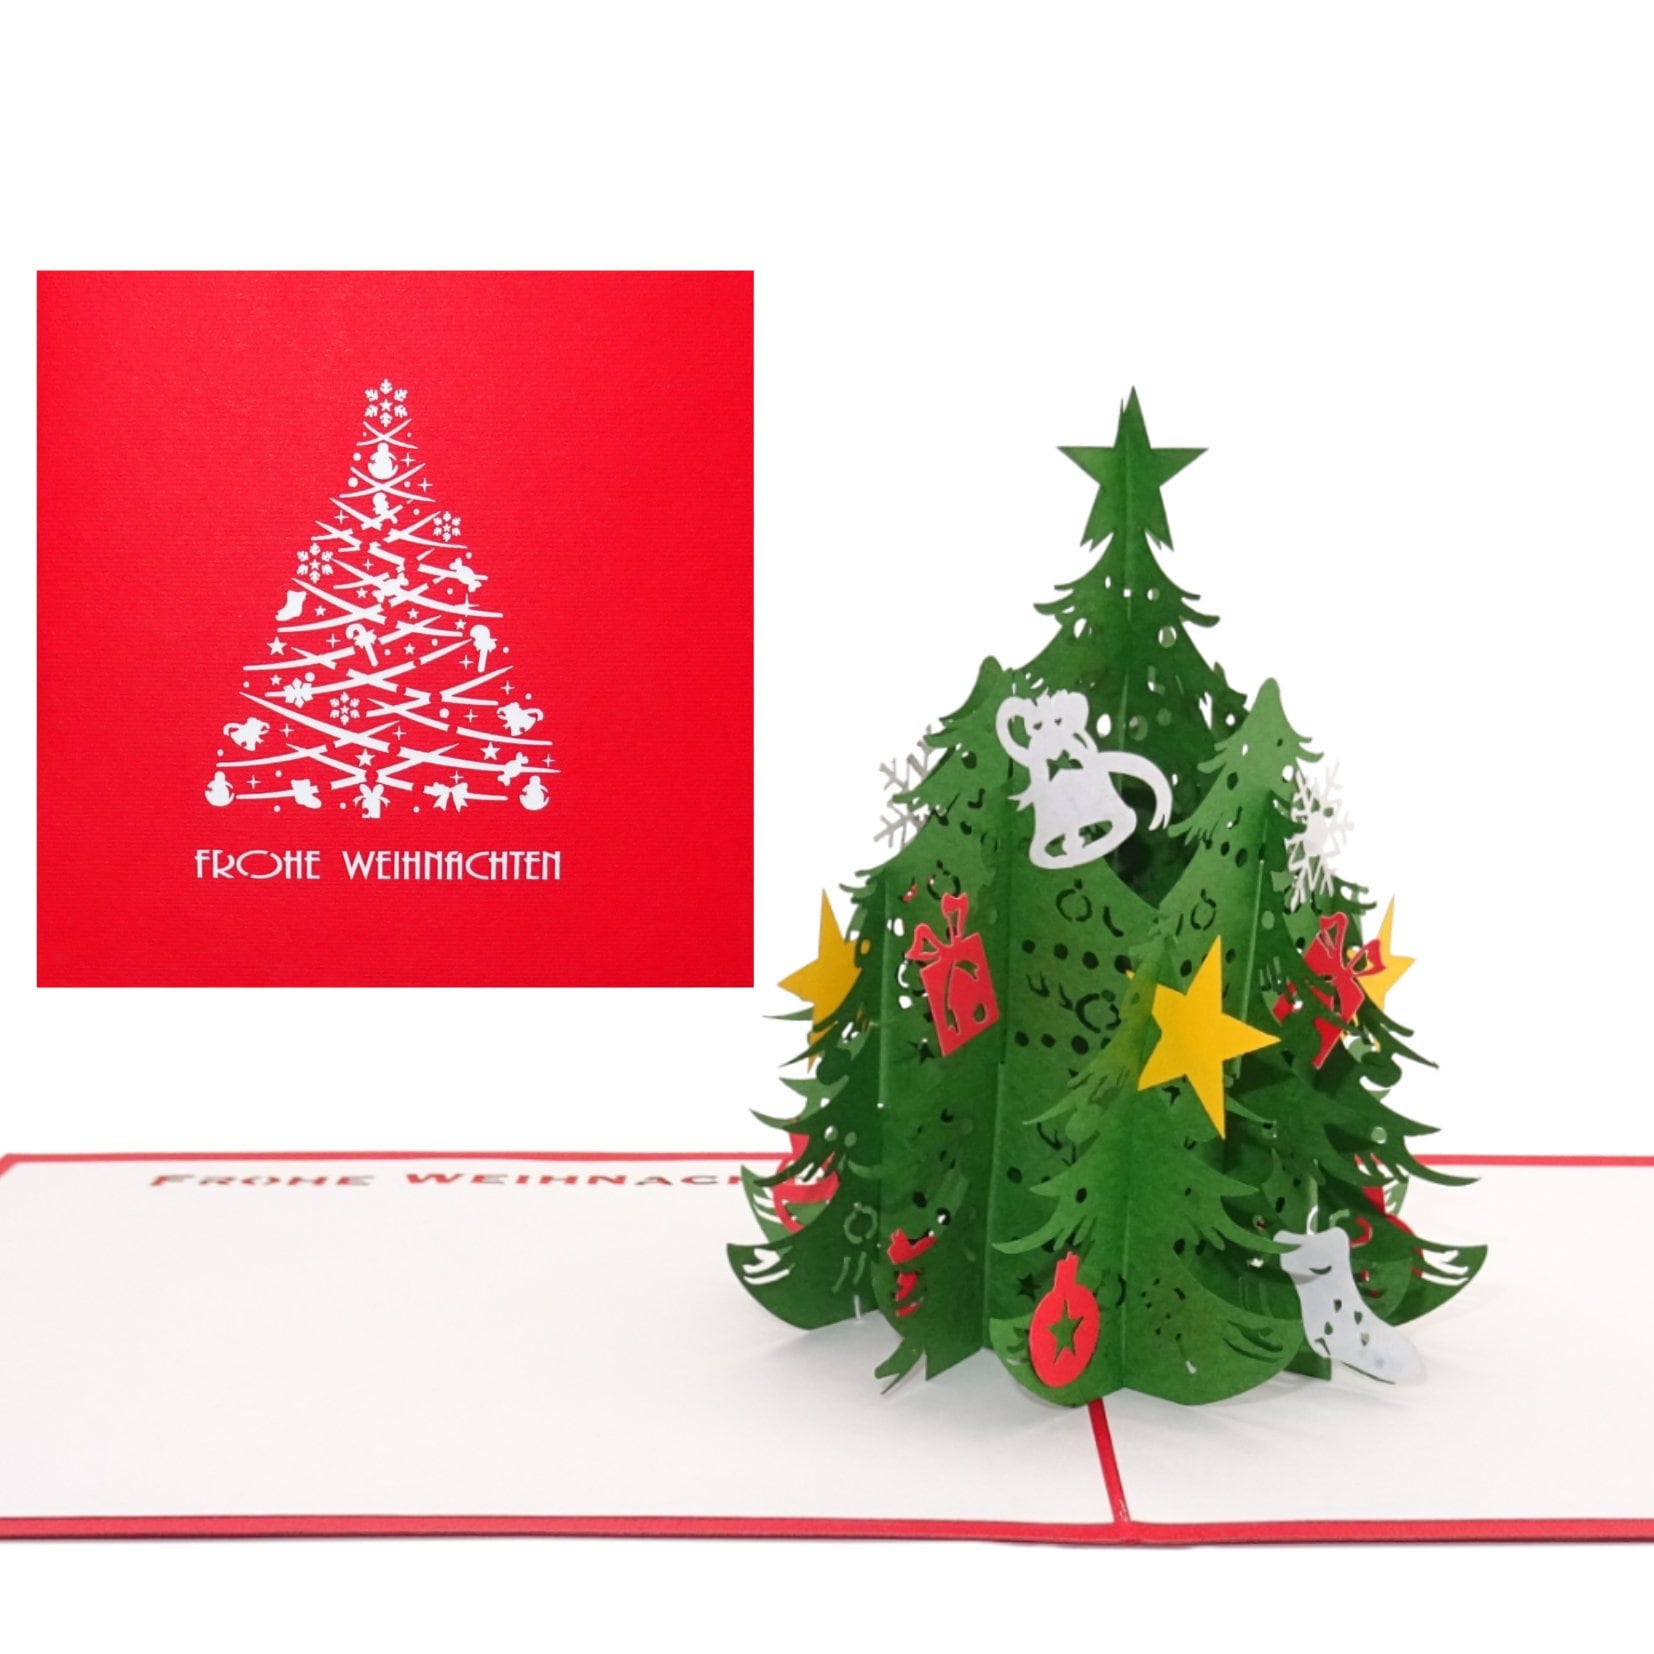 3D Christmas card "Christmas tree | Classic" Merry Christmas - elegant pop-up card for Christmas, gift card, 3D greeting card